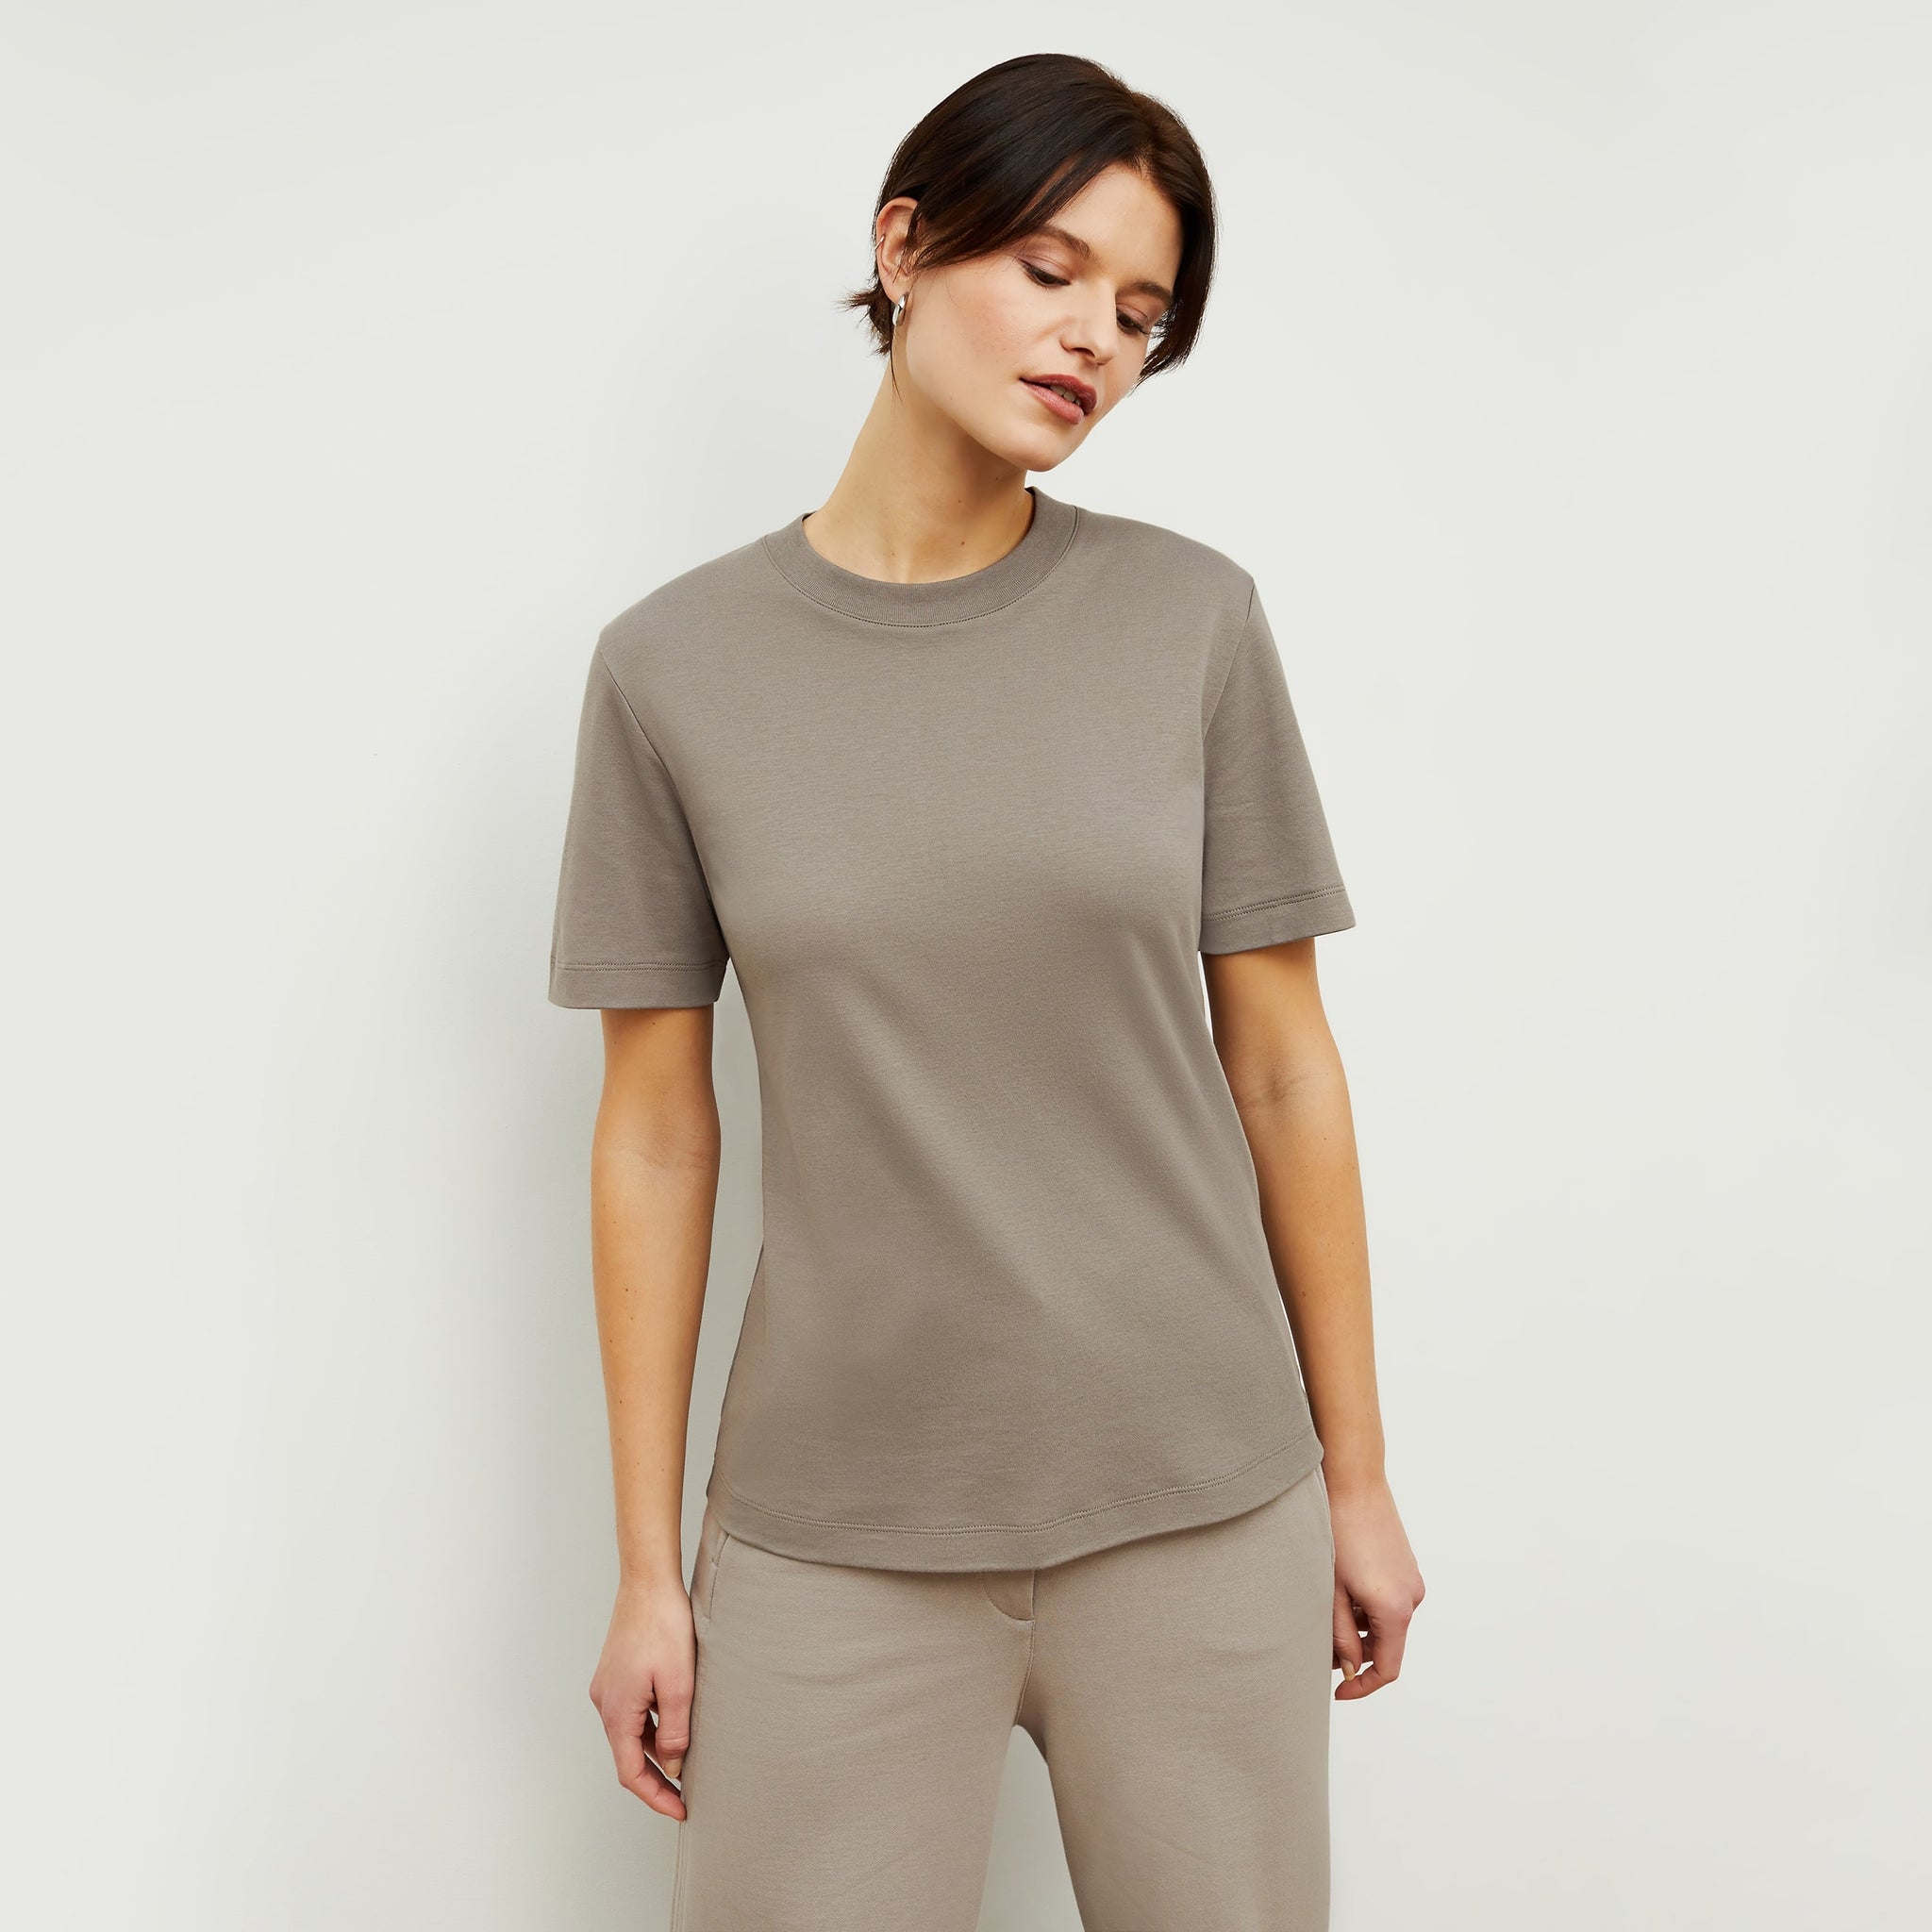 Front image of a woman standing wearing the Leslie T-Shirt—Compact Cotton in Pebble